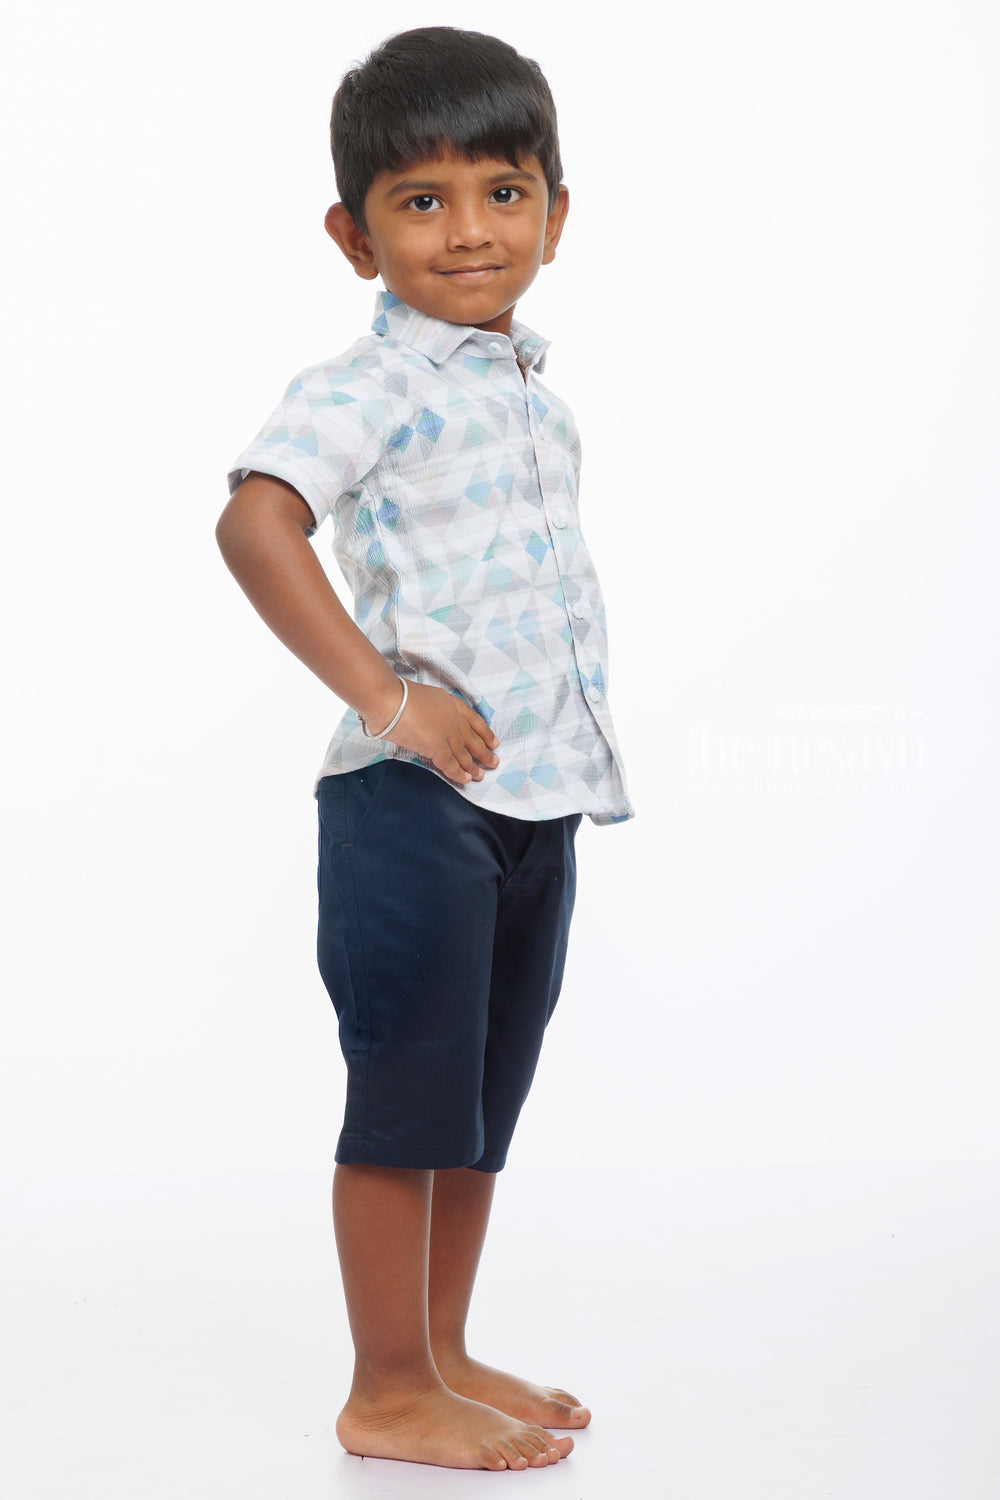 The Nesavu Boys Casual Set Modern Prism Boys Shirt and Shorts Set: Stylish Comfort for Everyday Play Nesavu Buy Boys Geometric Print Casual Set | Navy Shorts Outfit for Kids Online | The Nesavu